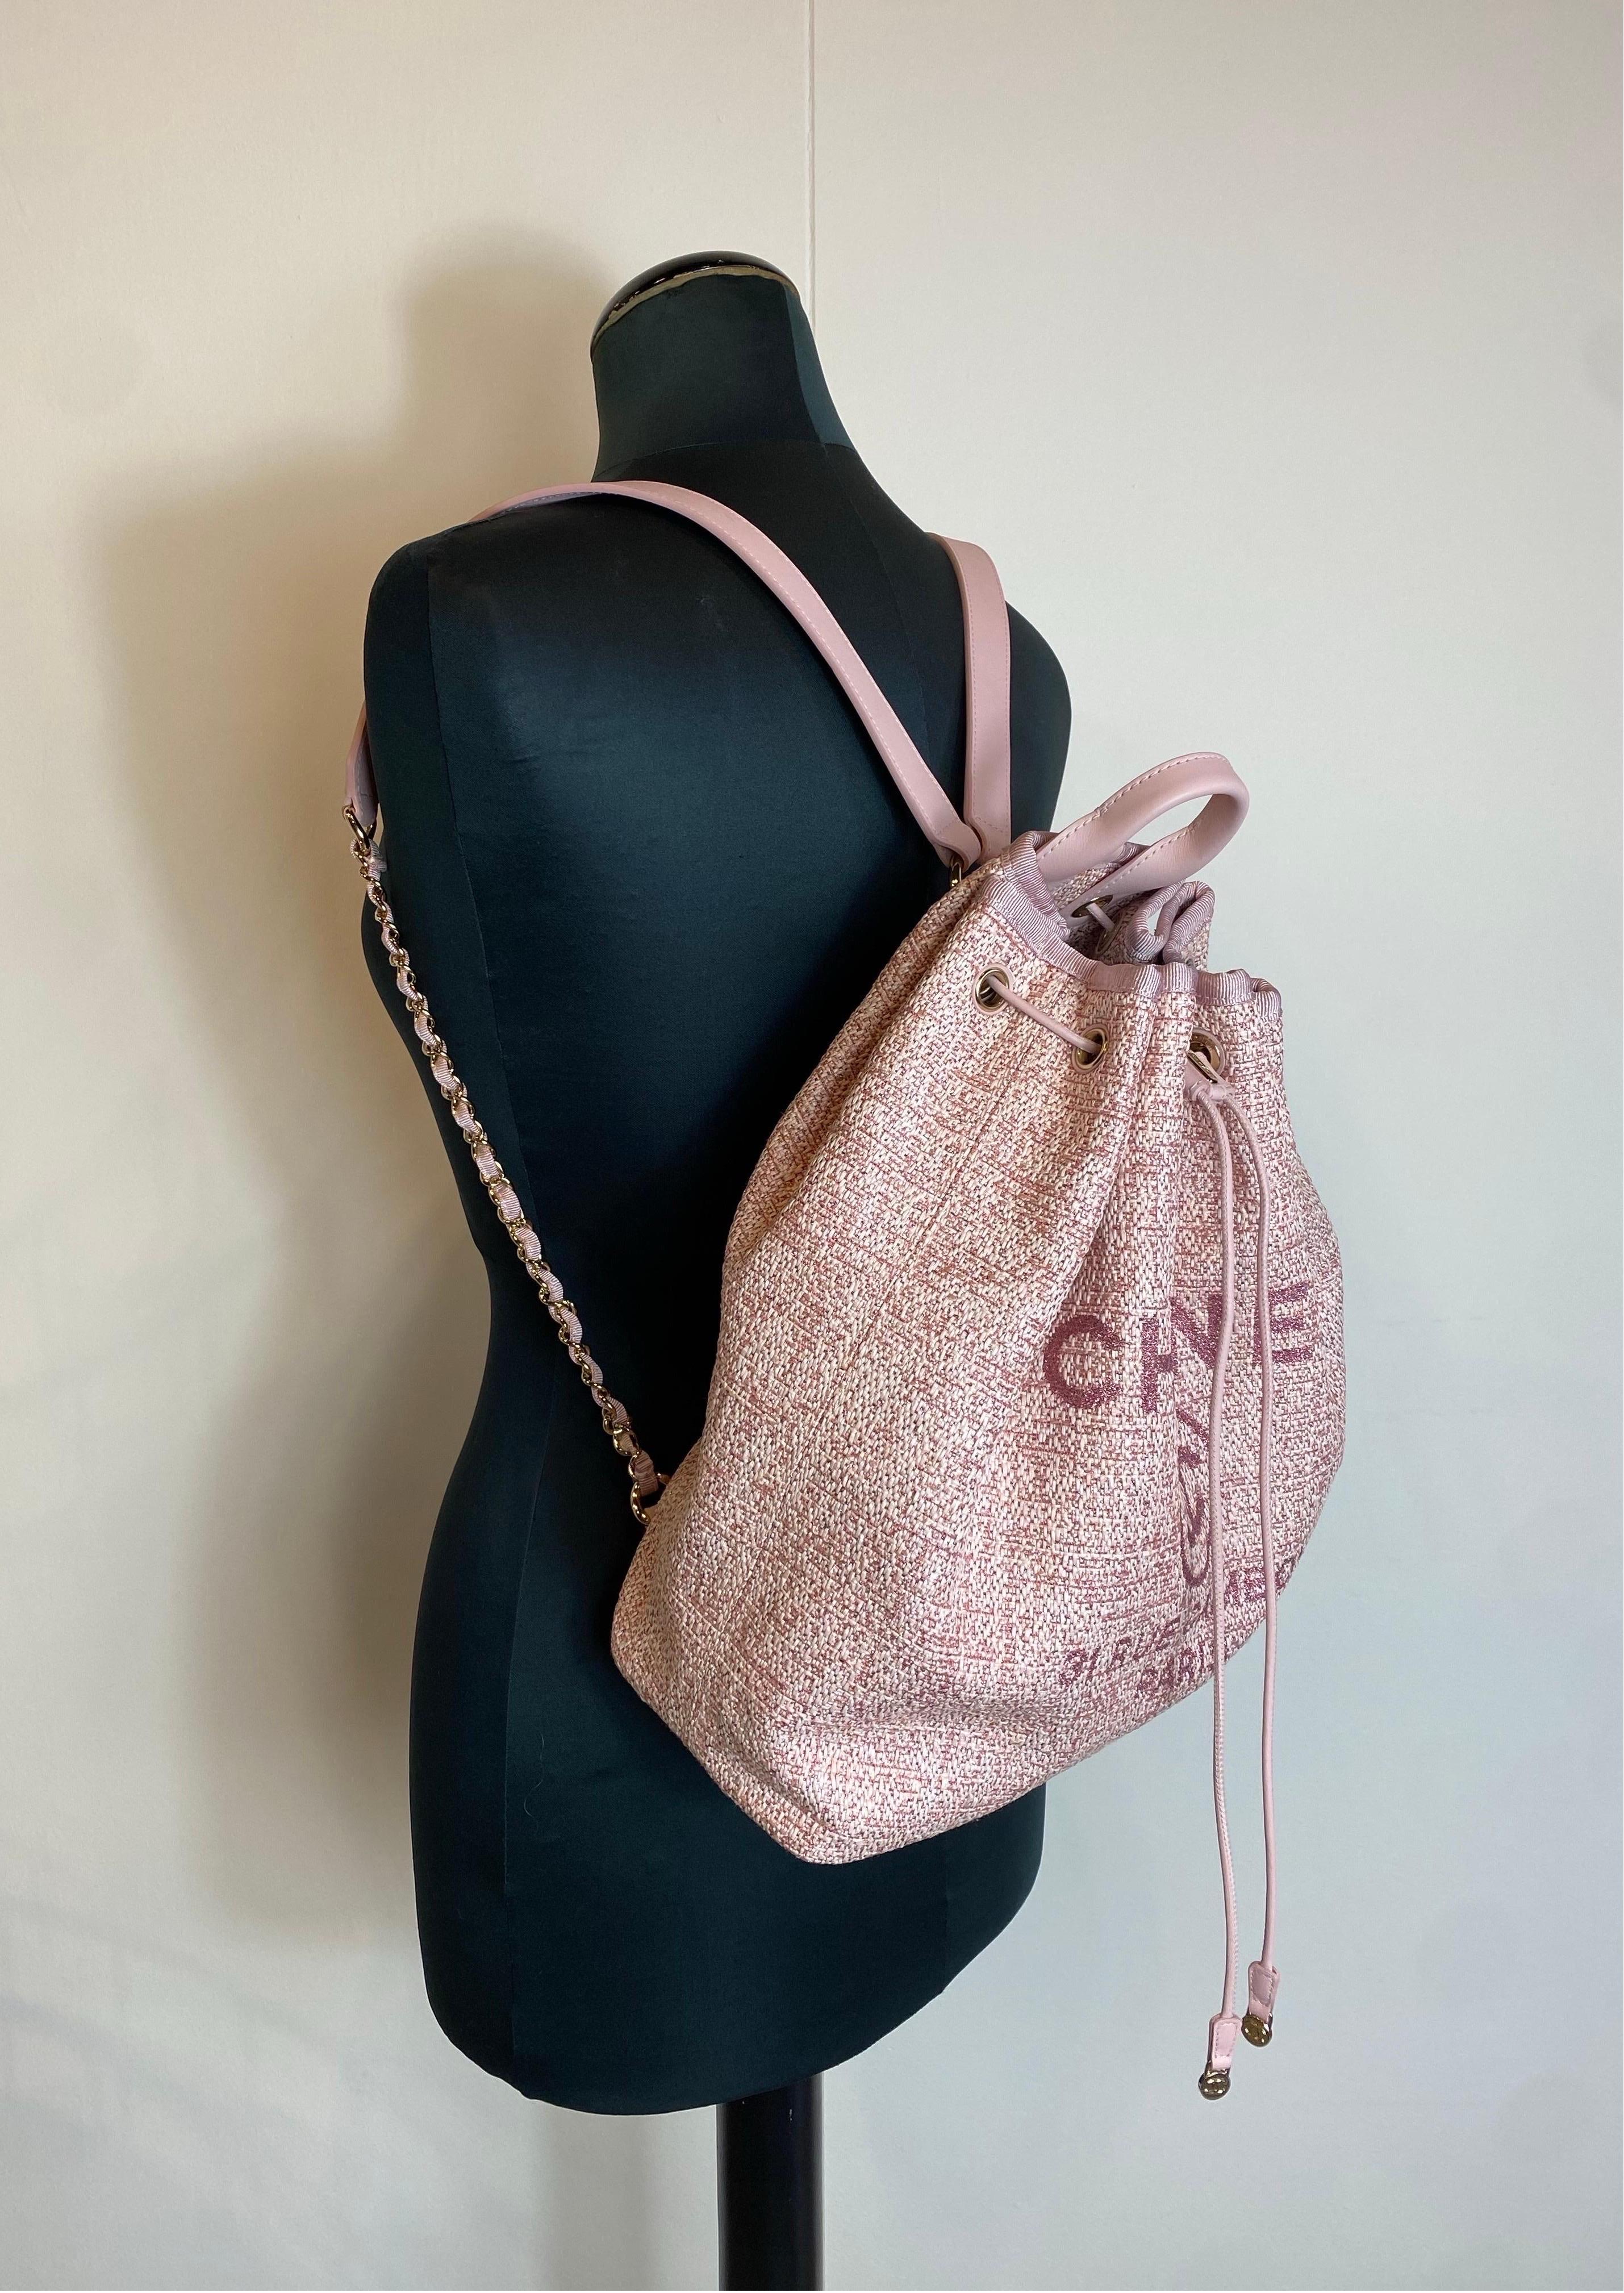 Deauville Chanel backpack.
In fabric, mix of different pinks. Leather details.
Coulisse closure.
Inside there is a pocket closed by a zip.
34cm tall
30cm wide
13 cm deep
Excellent general condition, has only two light orange marks as shown in the